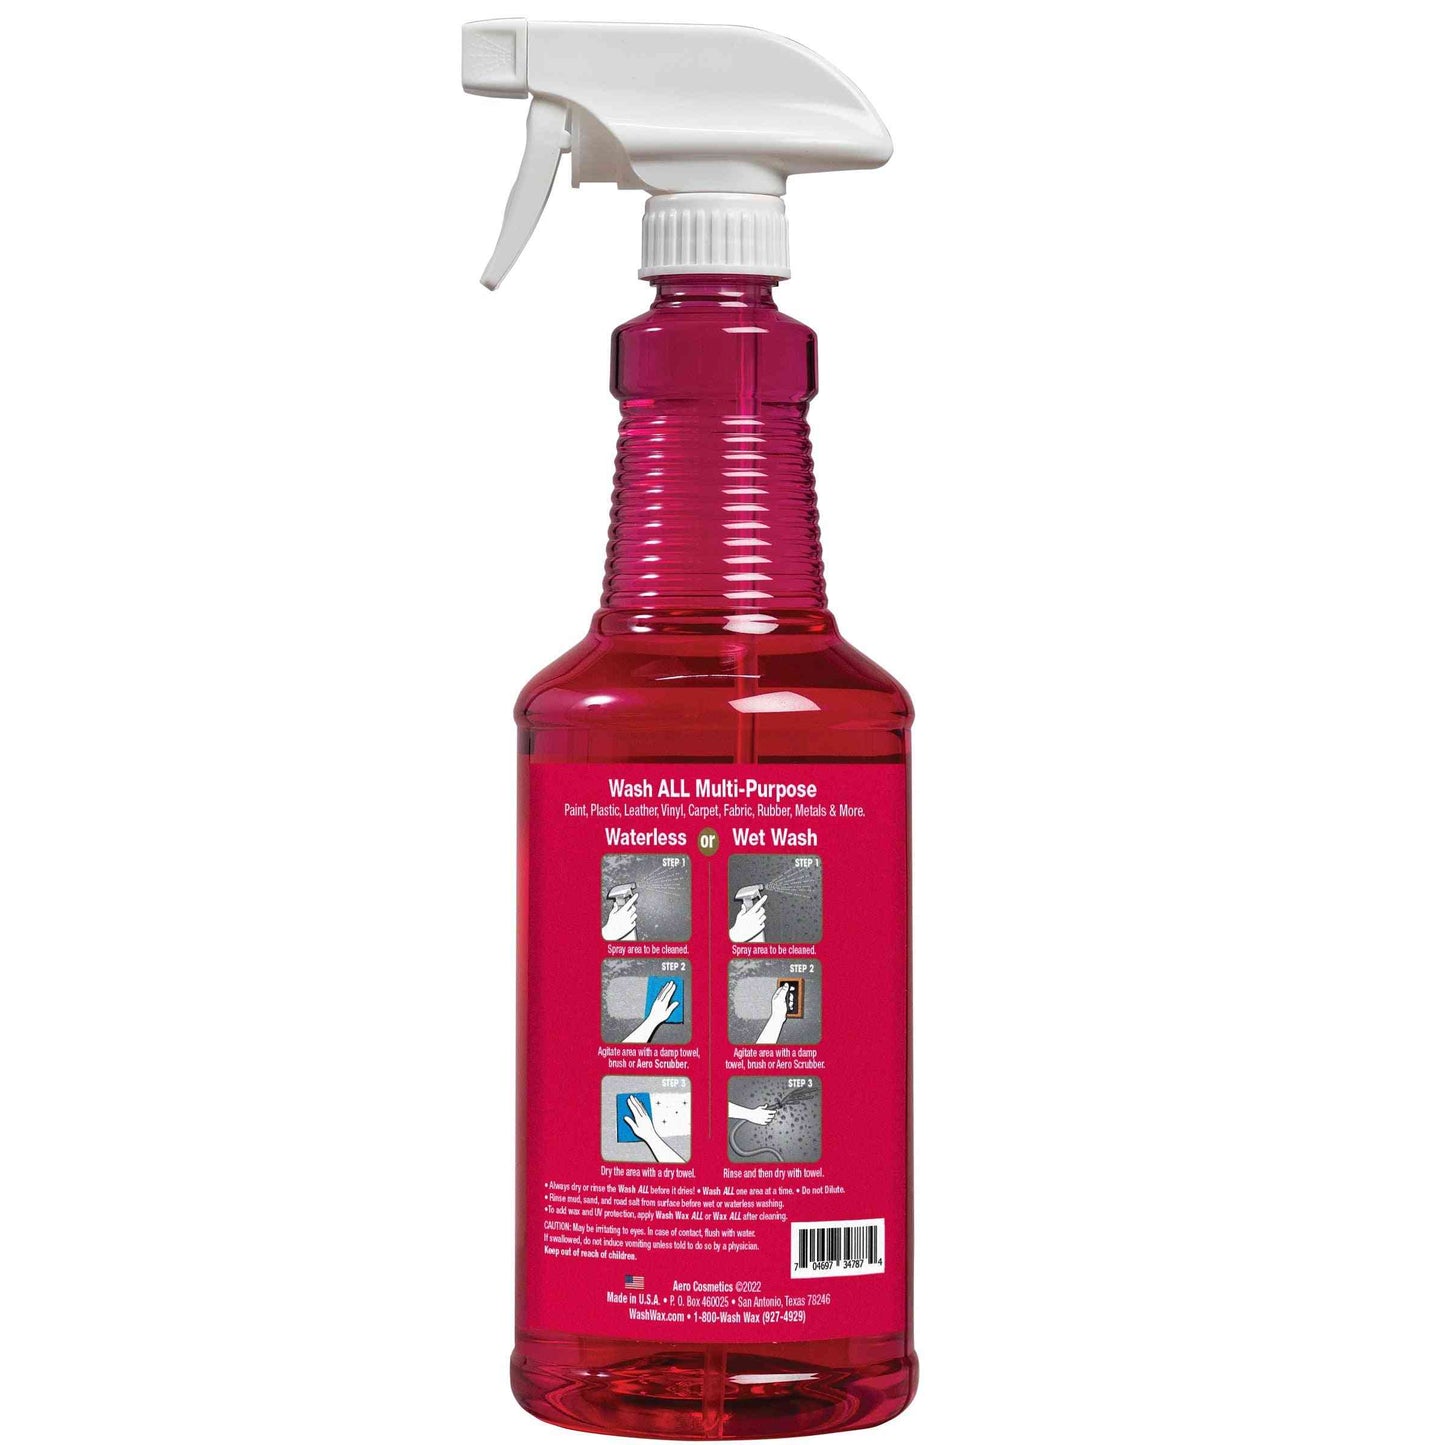 Wash All Degreaser 32 Fl. oz - Multi-Purpose Cleaner and Degreaser